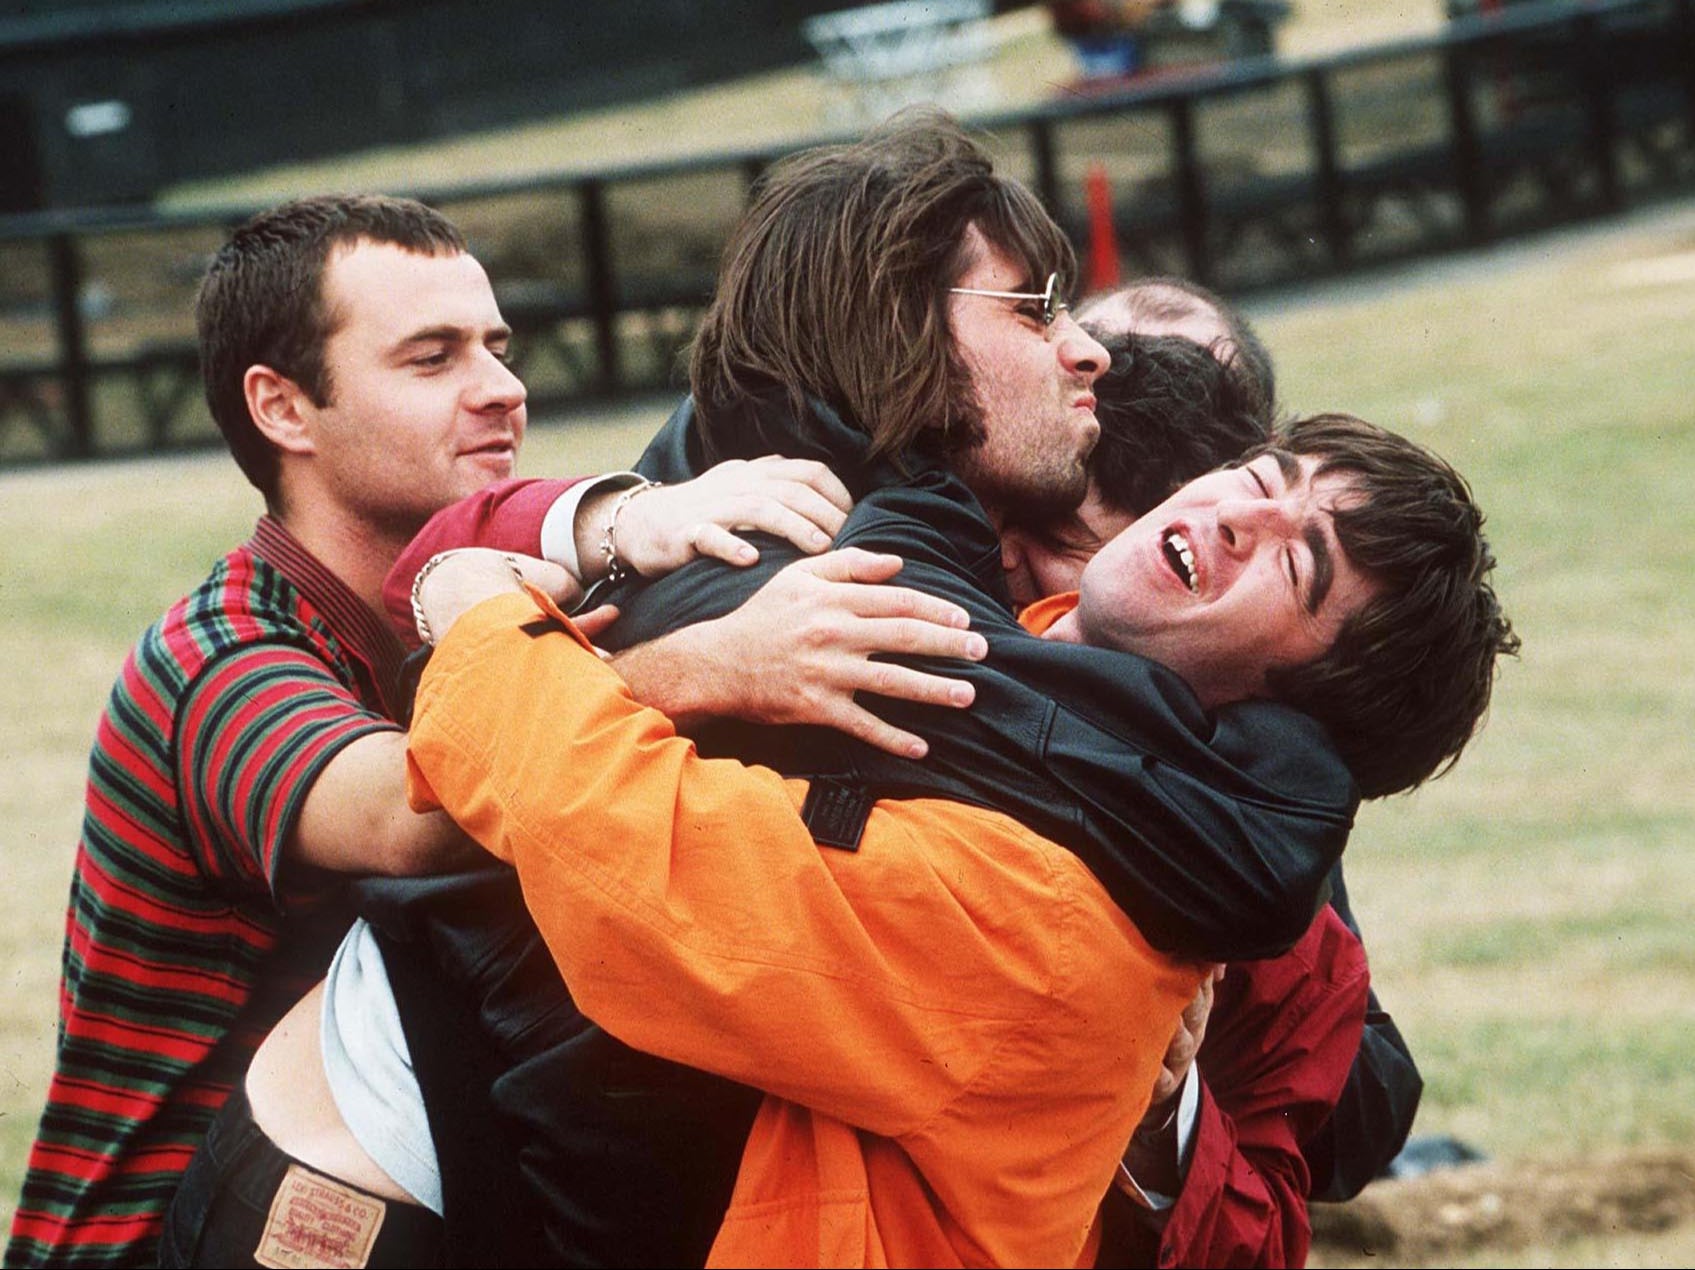 Alan White, Liam Gallagher, Noel Gallagher in a group hug with fellow Oasis members Paul ‘Guigsy’ McGuigan and Paul ‘Bonehead’ Arthurs before their show at Knebworth, 1996